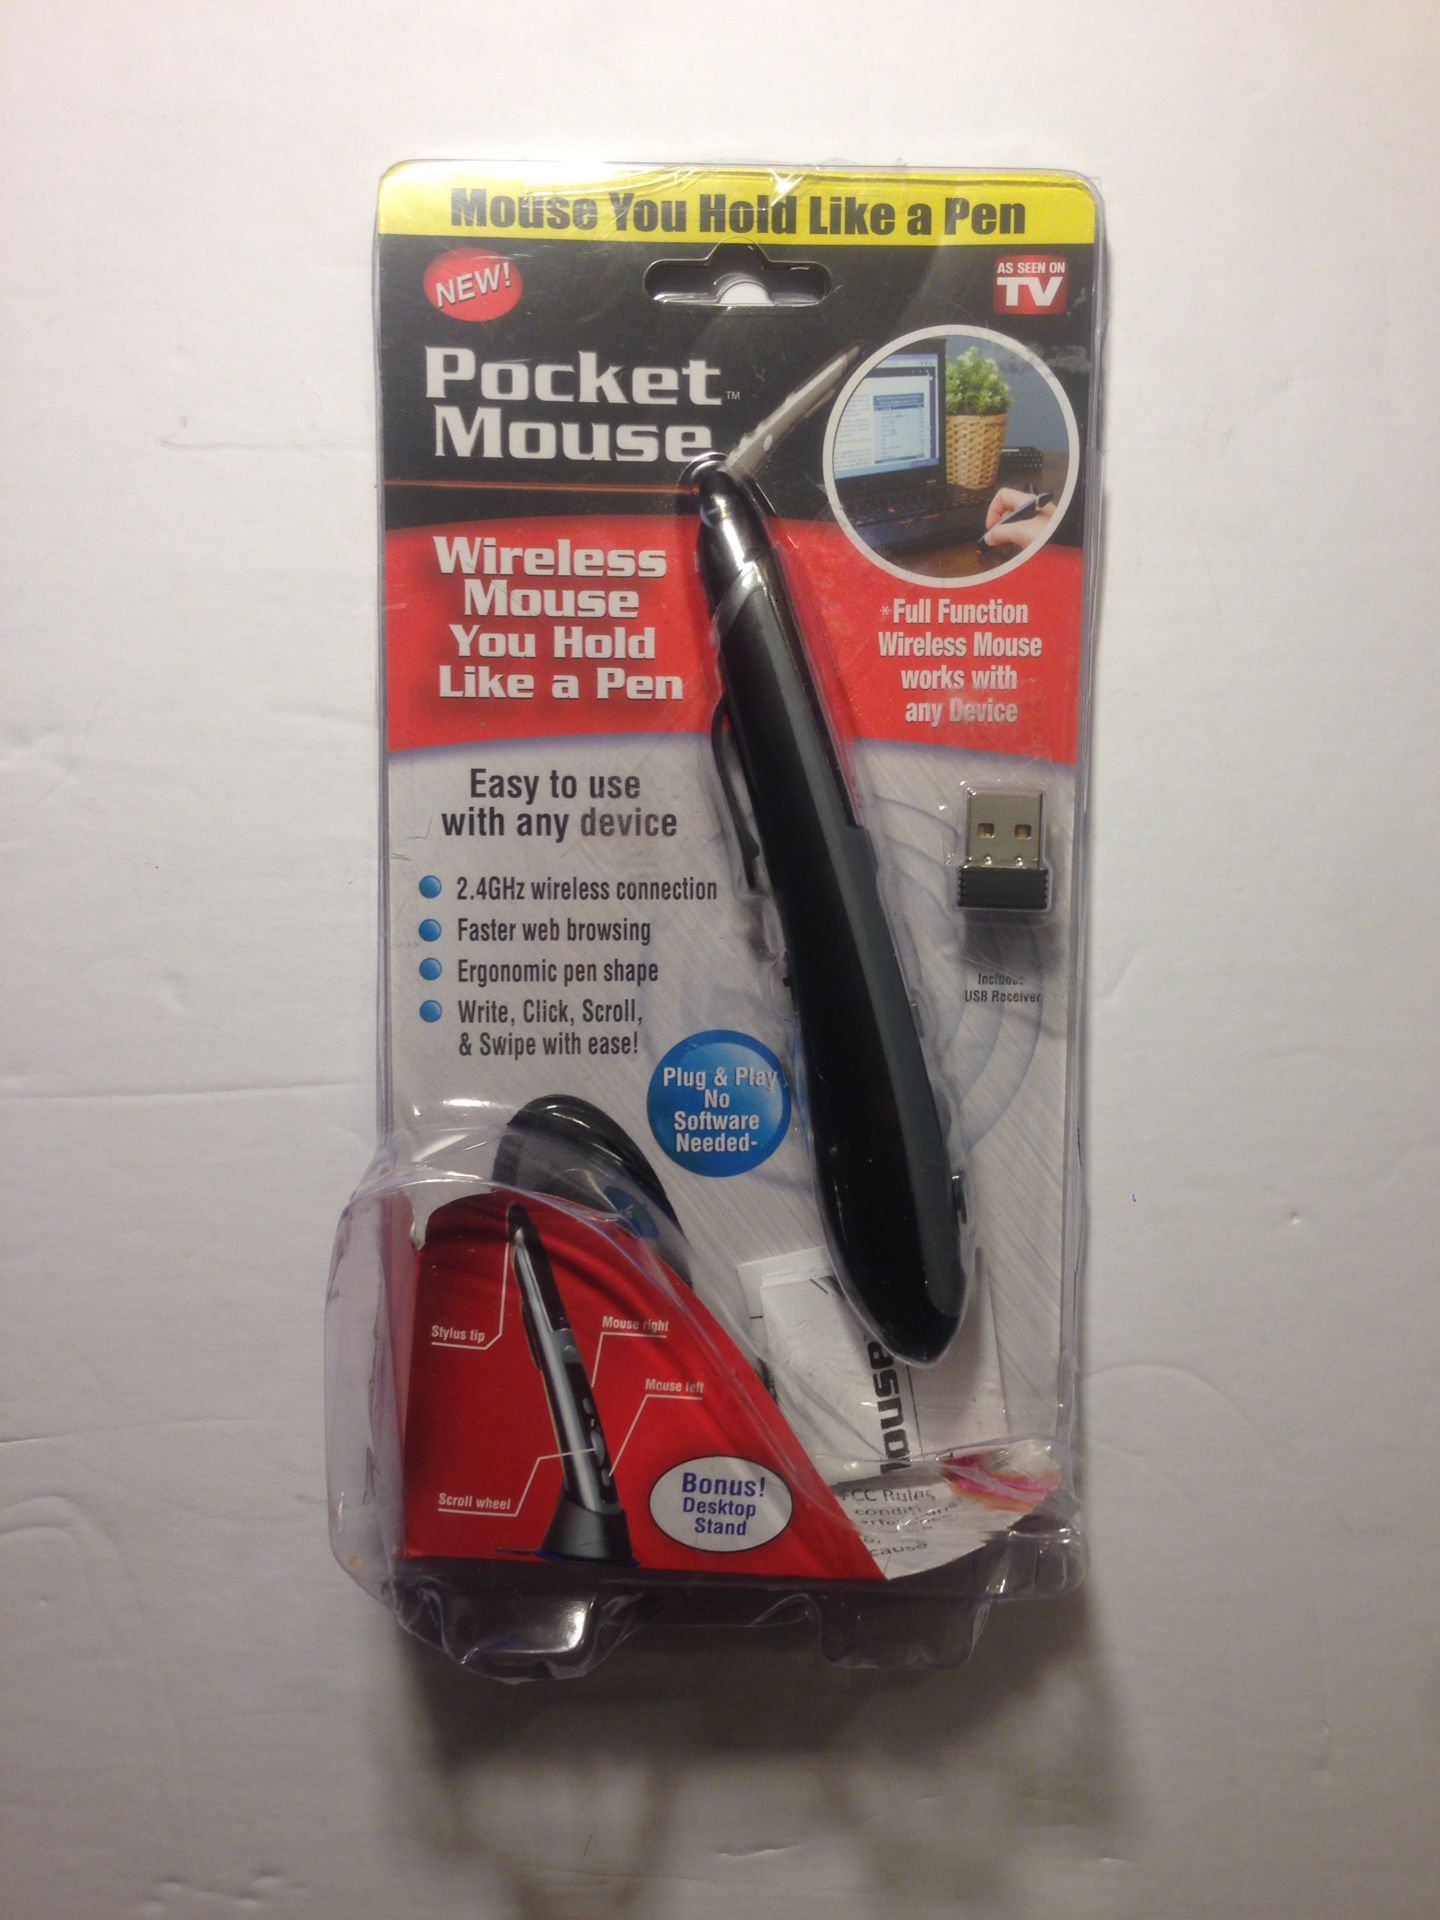 Pocket mouse ., wireless mouse you hold like a pen